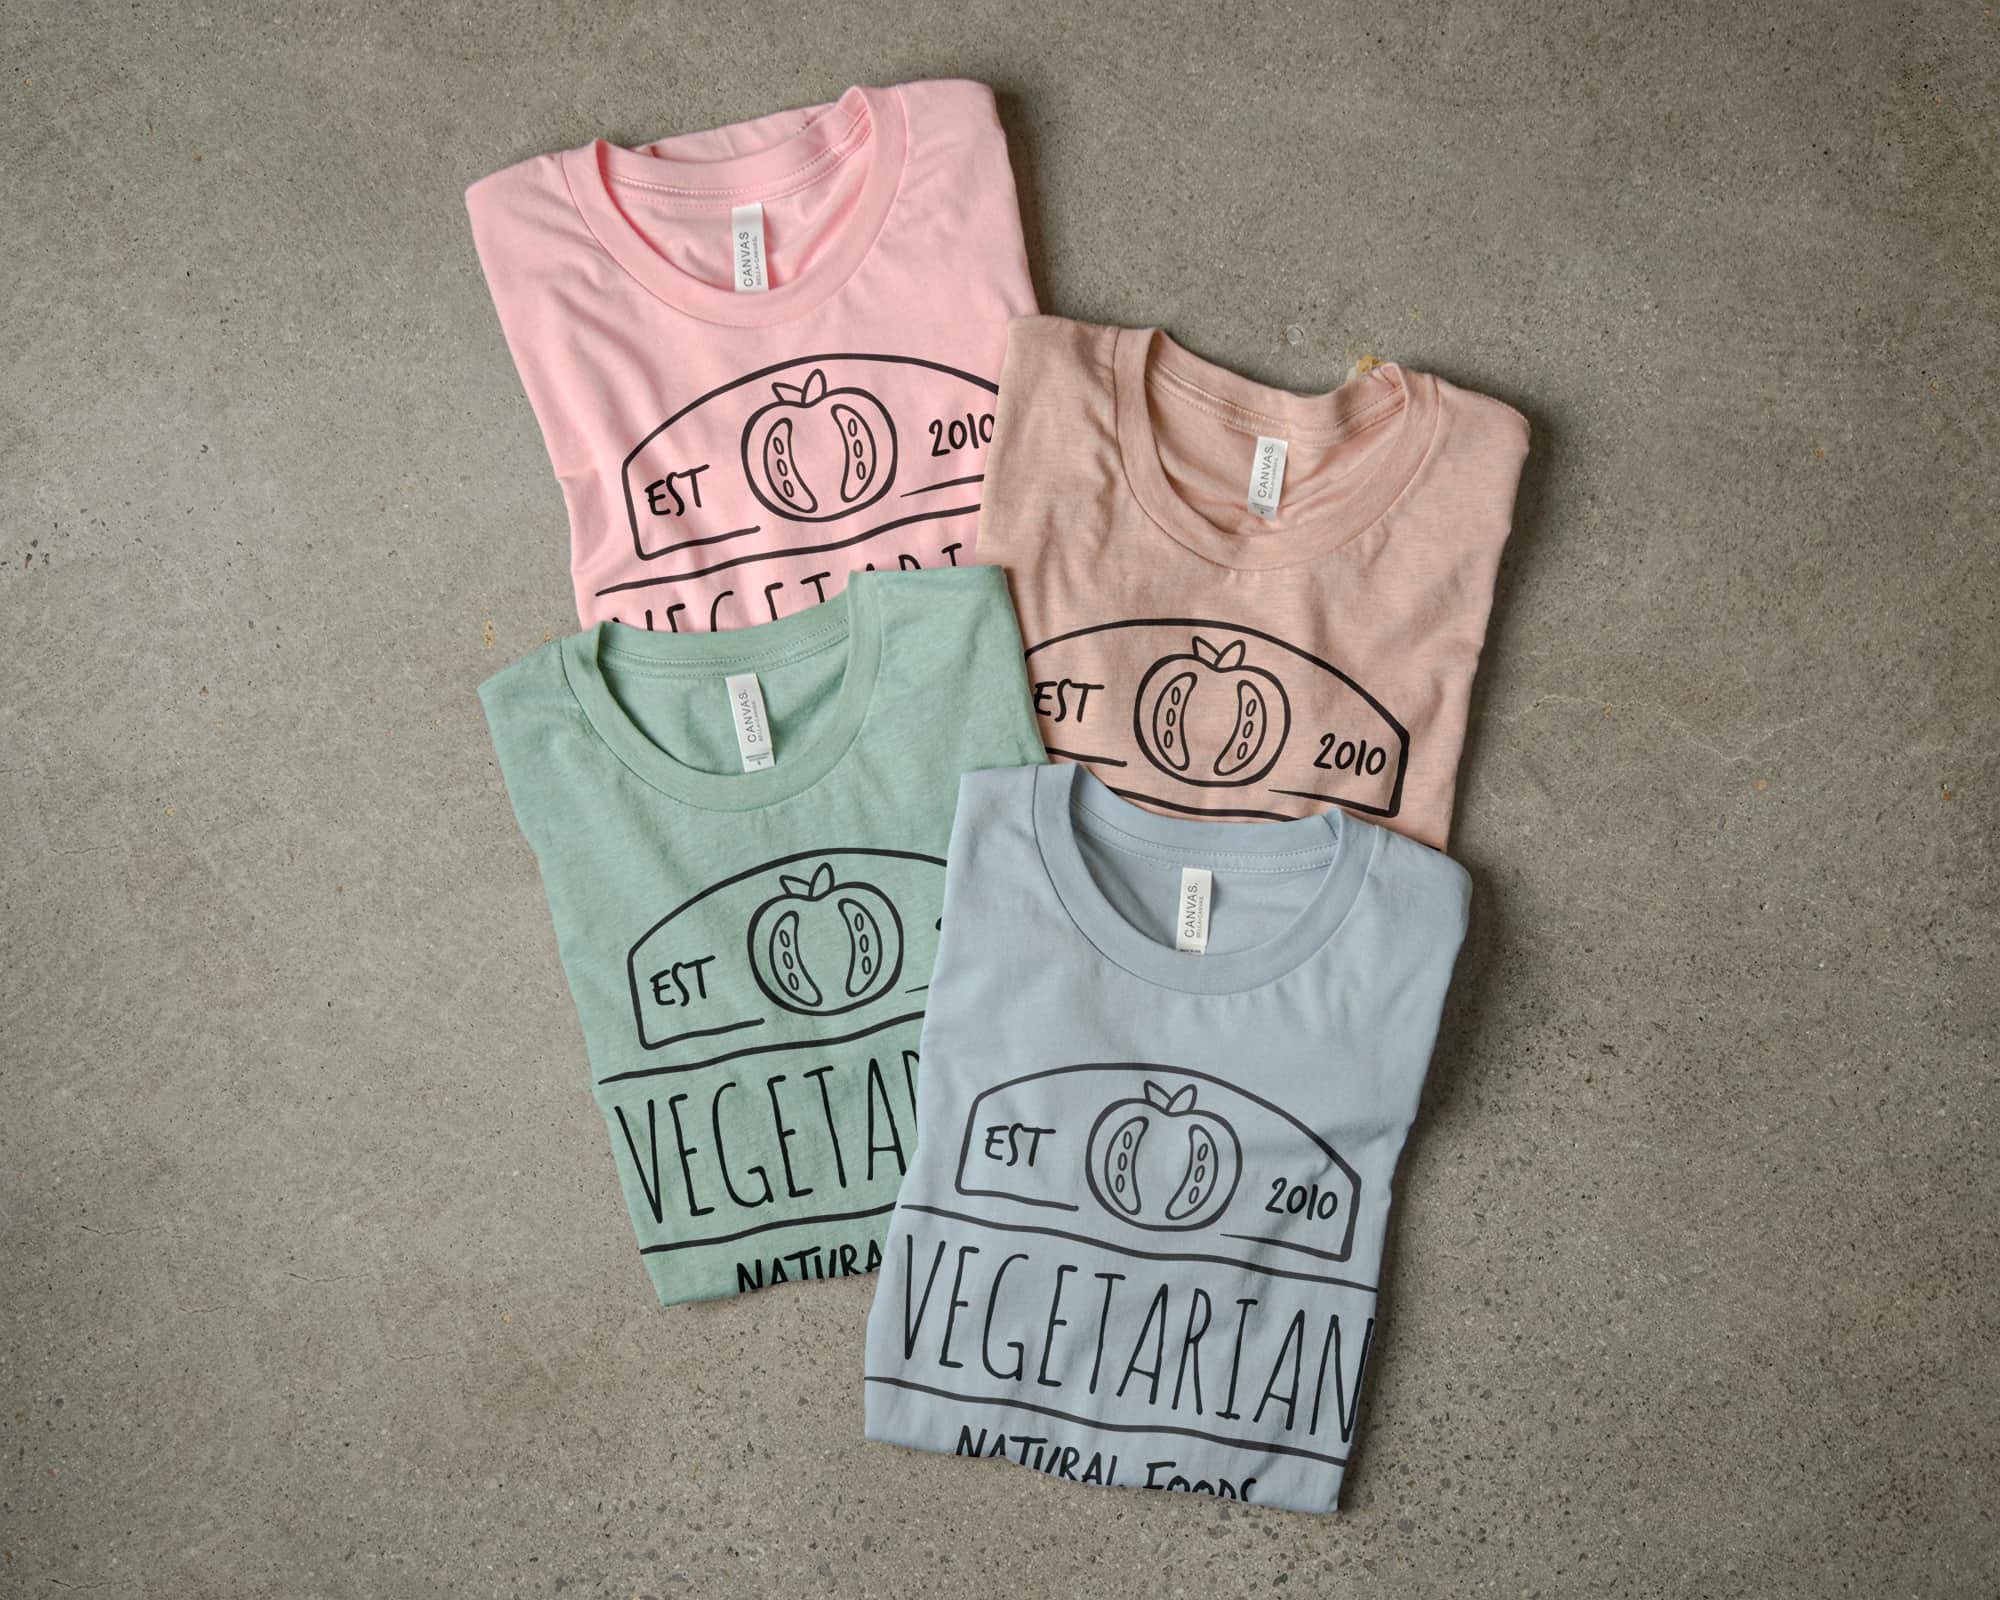 Folded t-shirt display arranged to exemplify the pastel pallet.